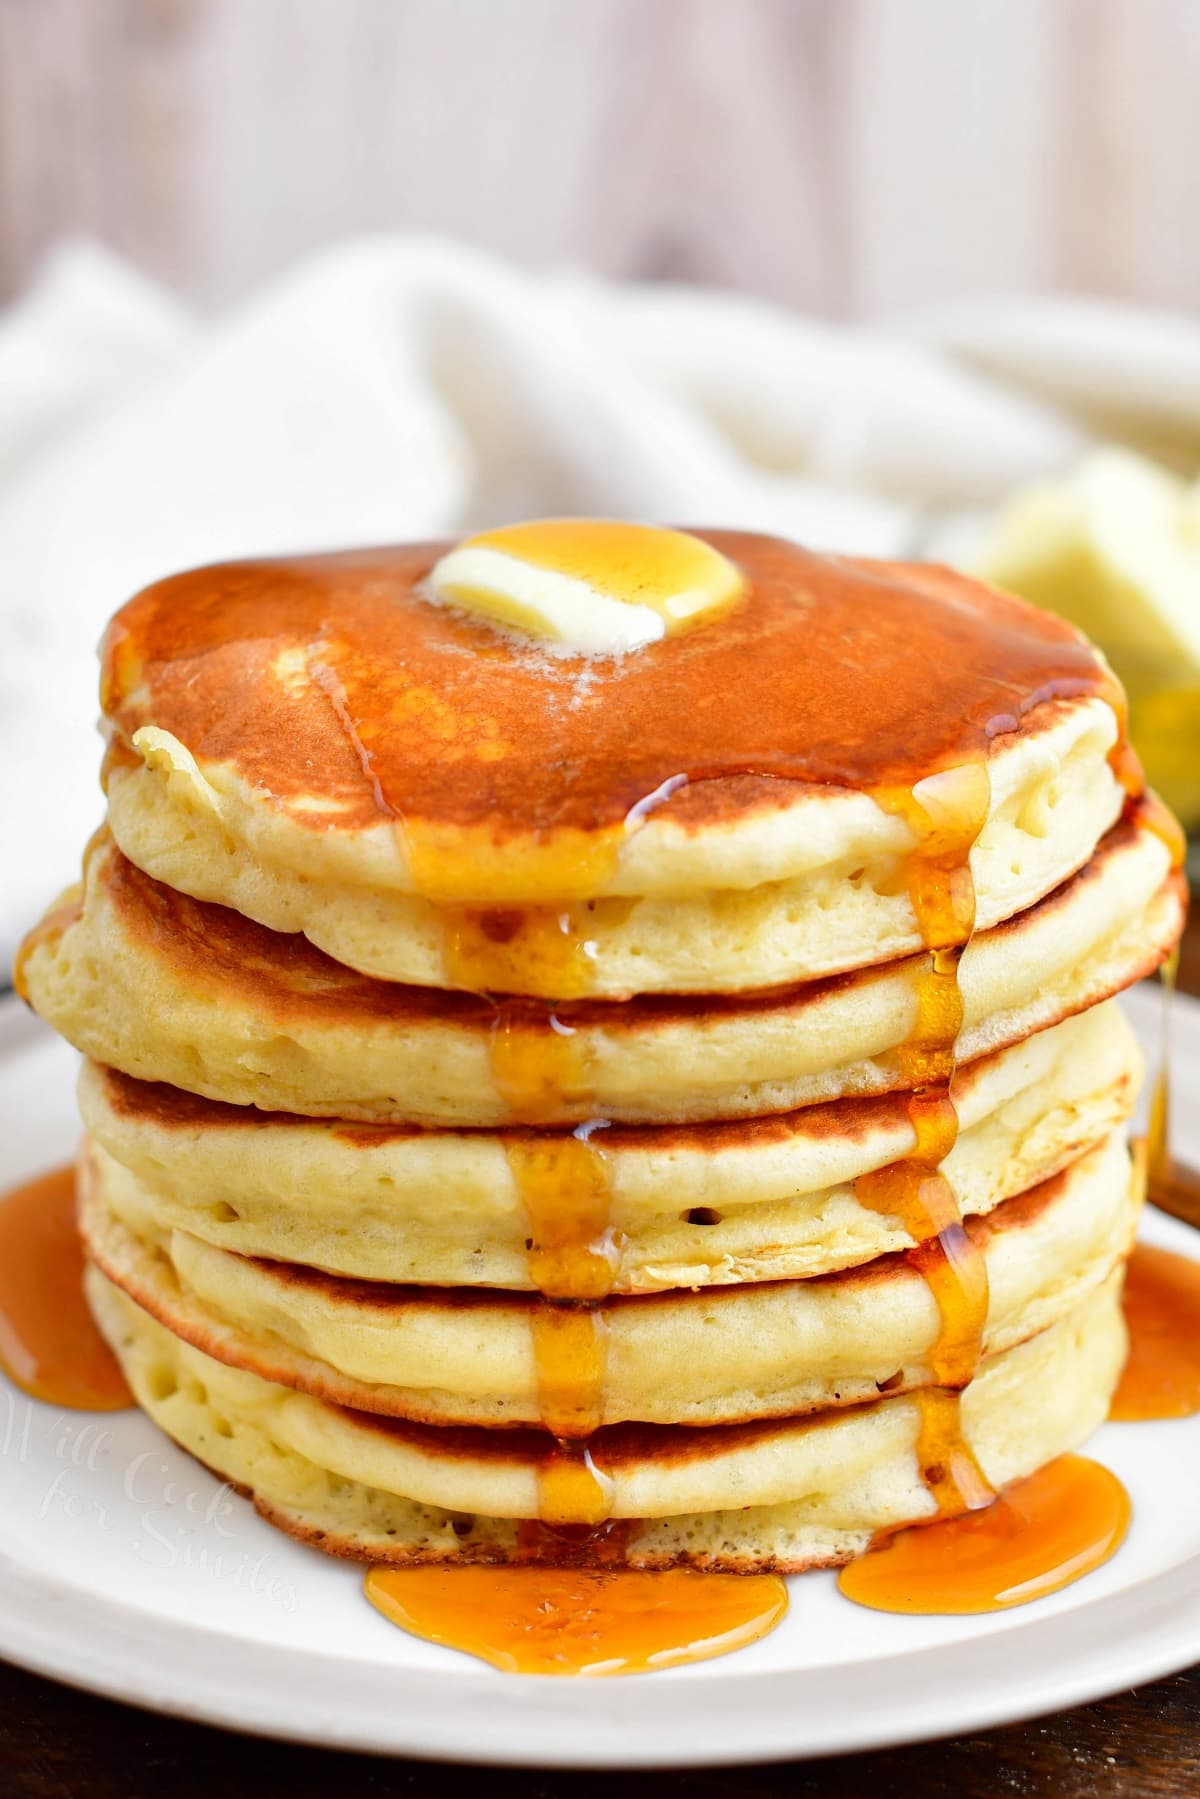 A stack of buttermilk pancakes is presented on a white plate with butter and syrup.